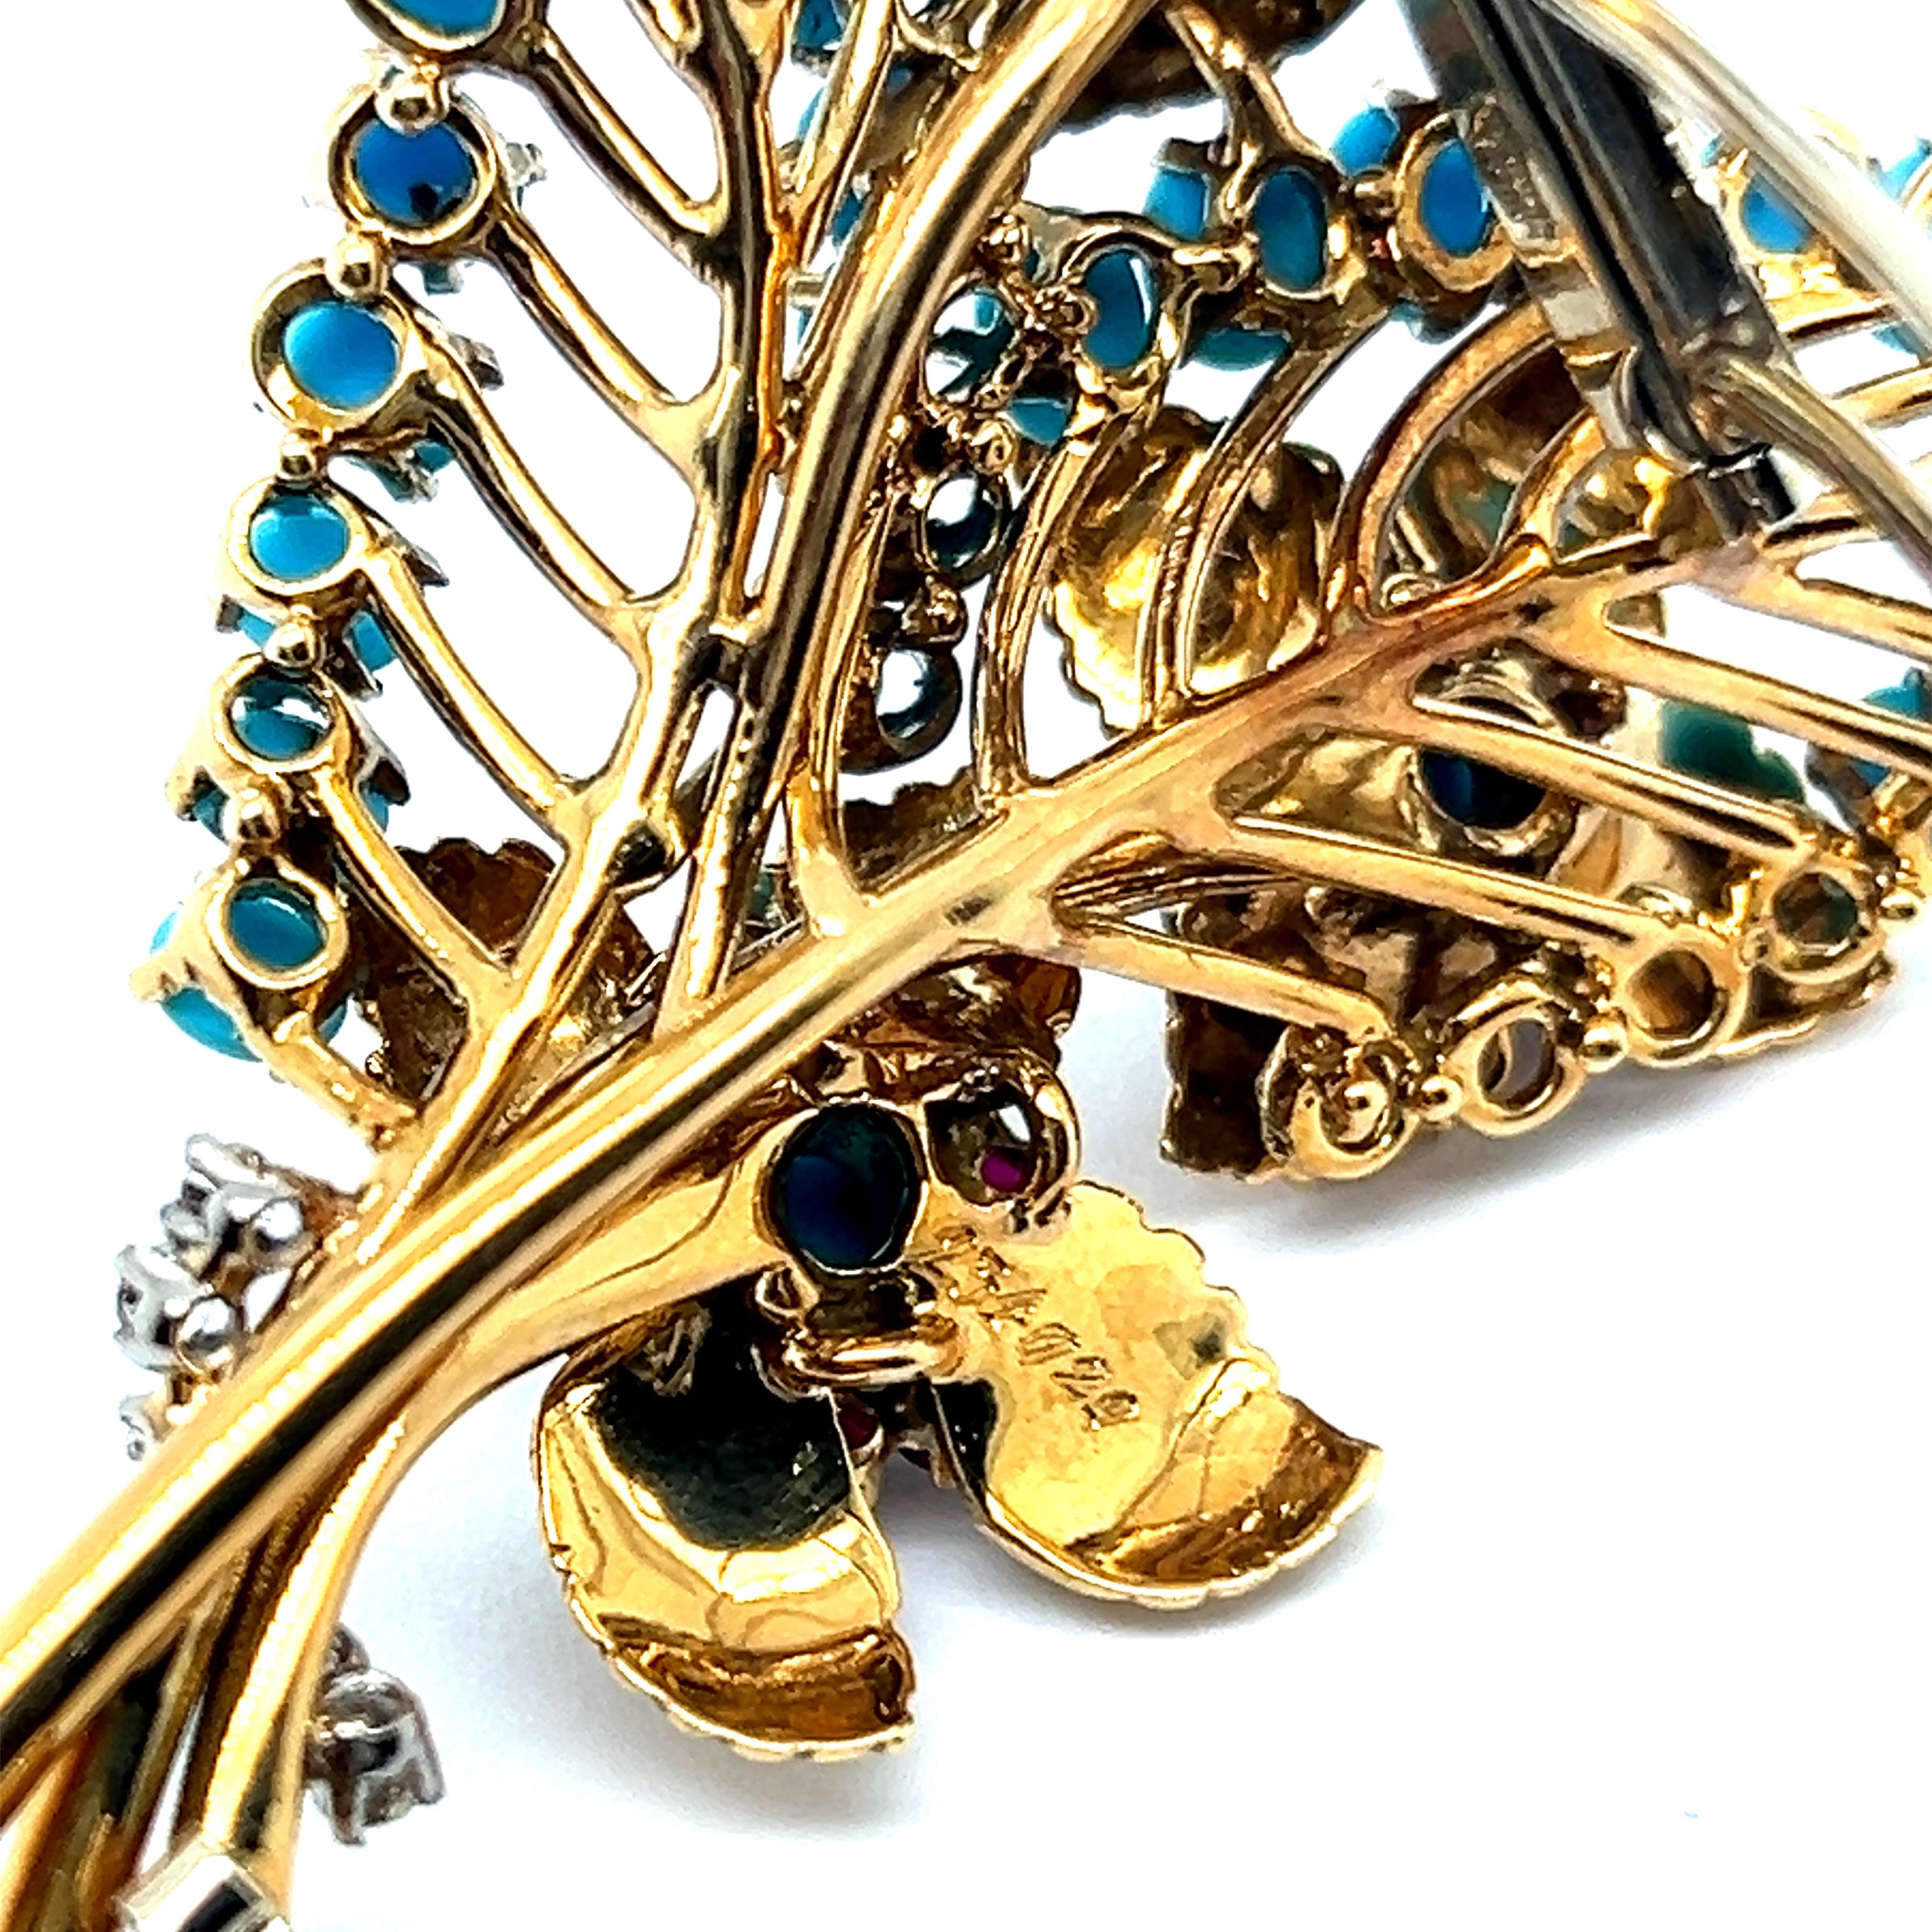 Brooch with Turquoise, Rubies & Diamonds in 18 Karat Yellow Gold by Gübelin For Sale 2